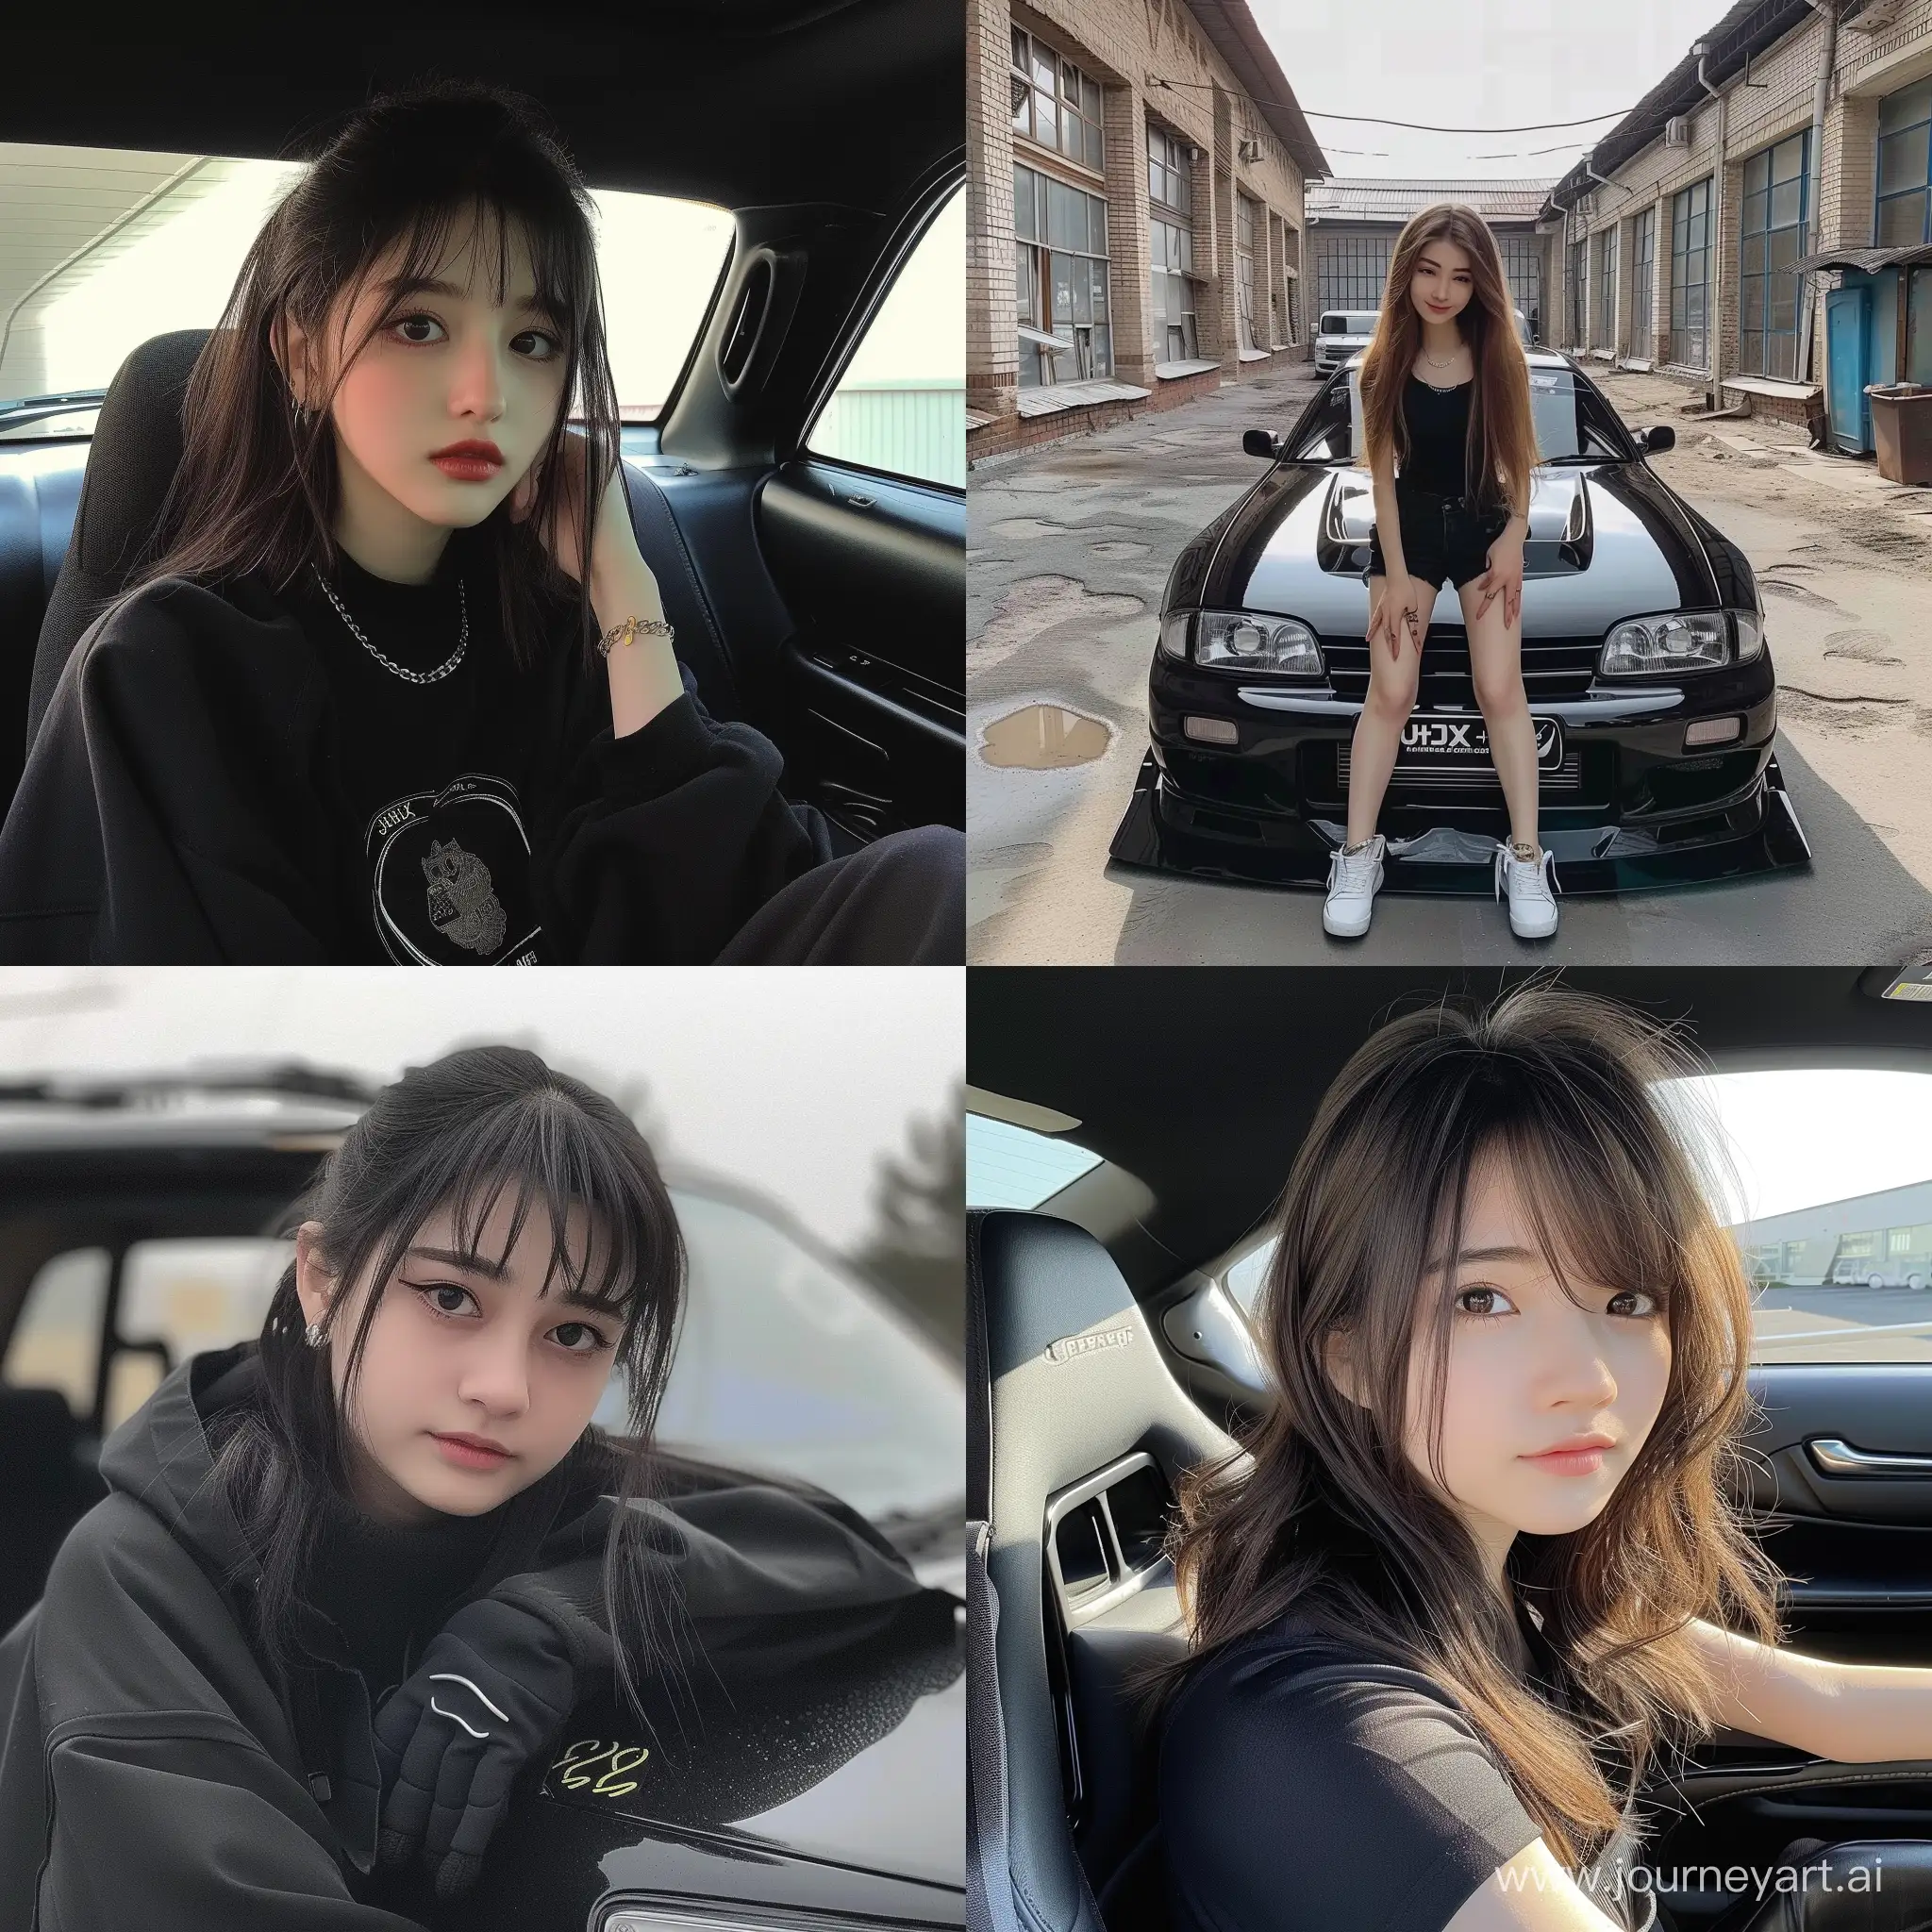 Adorable-Japanese-Girl-with-Black-Mark2-JZX81-Car-in-Kazakhstan